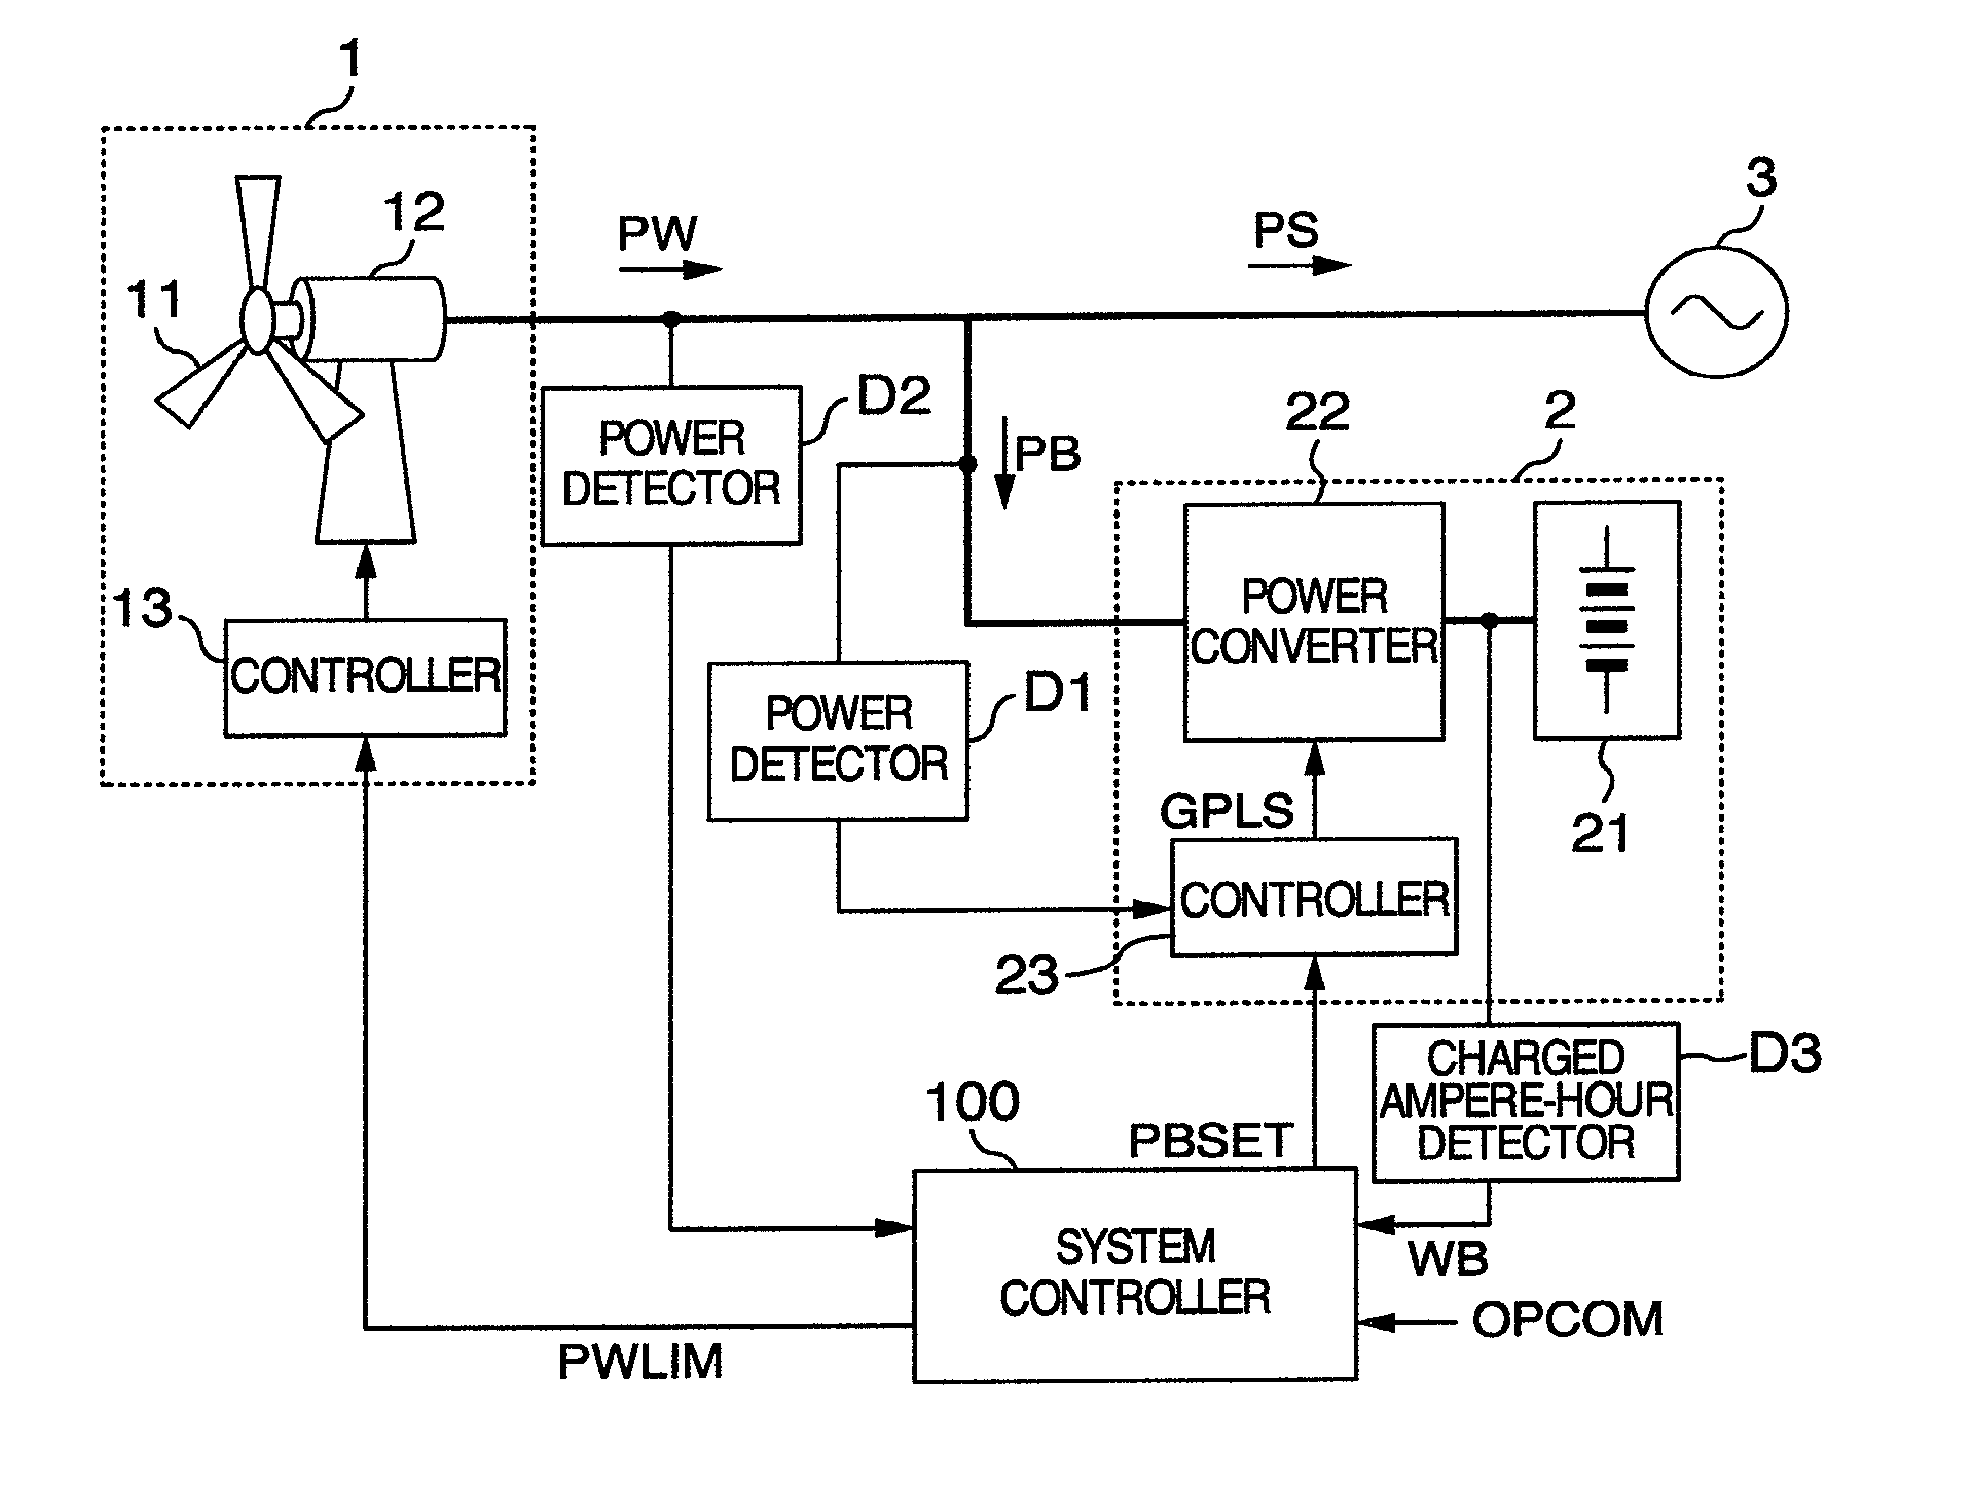 Hybrid power generation of wind-power generator and battery energy storage system